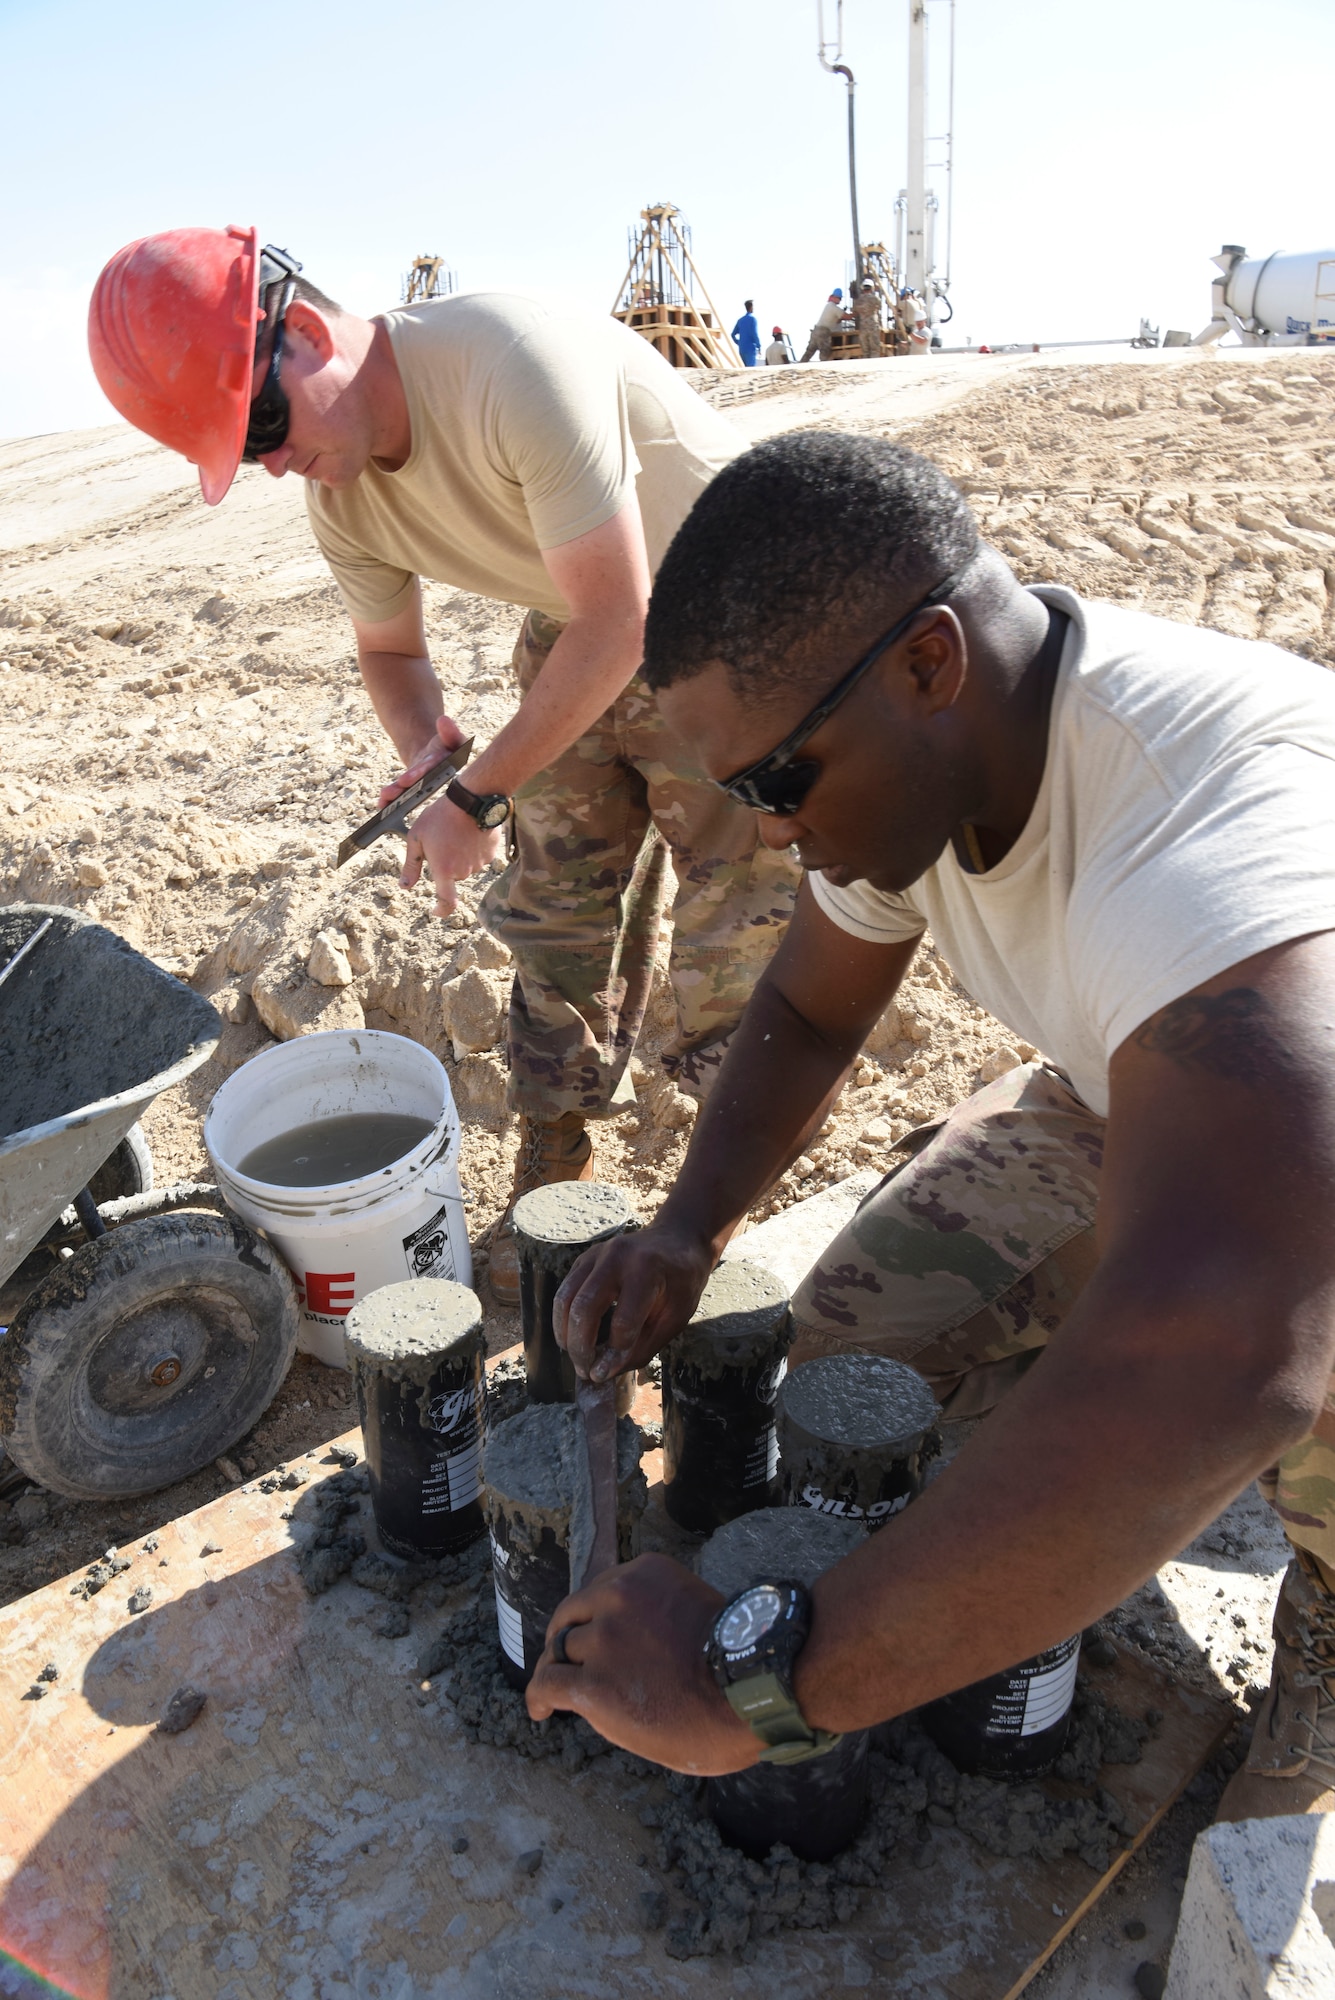 Tech. Sgt. Jeremy Goss, and Master Sgt. David Bigesby, 577th Expeditionary Prime Base Engineer Emergency Force engineering assistants, performs concrete testing during construction, Dec. 23, 2018 at Al Dhafra Air Base, United Arab Emirates.